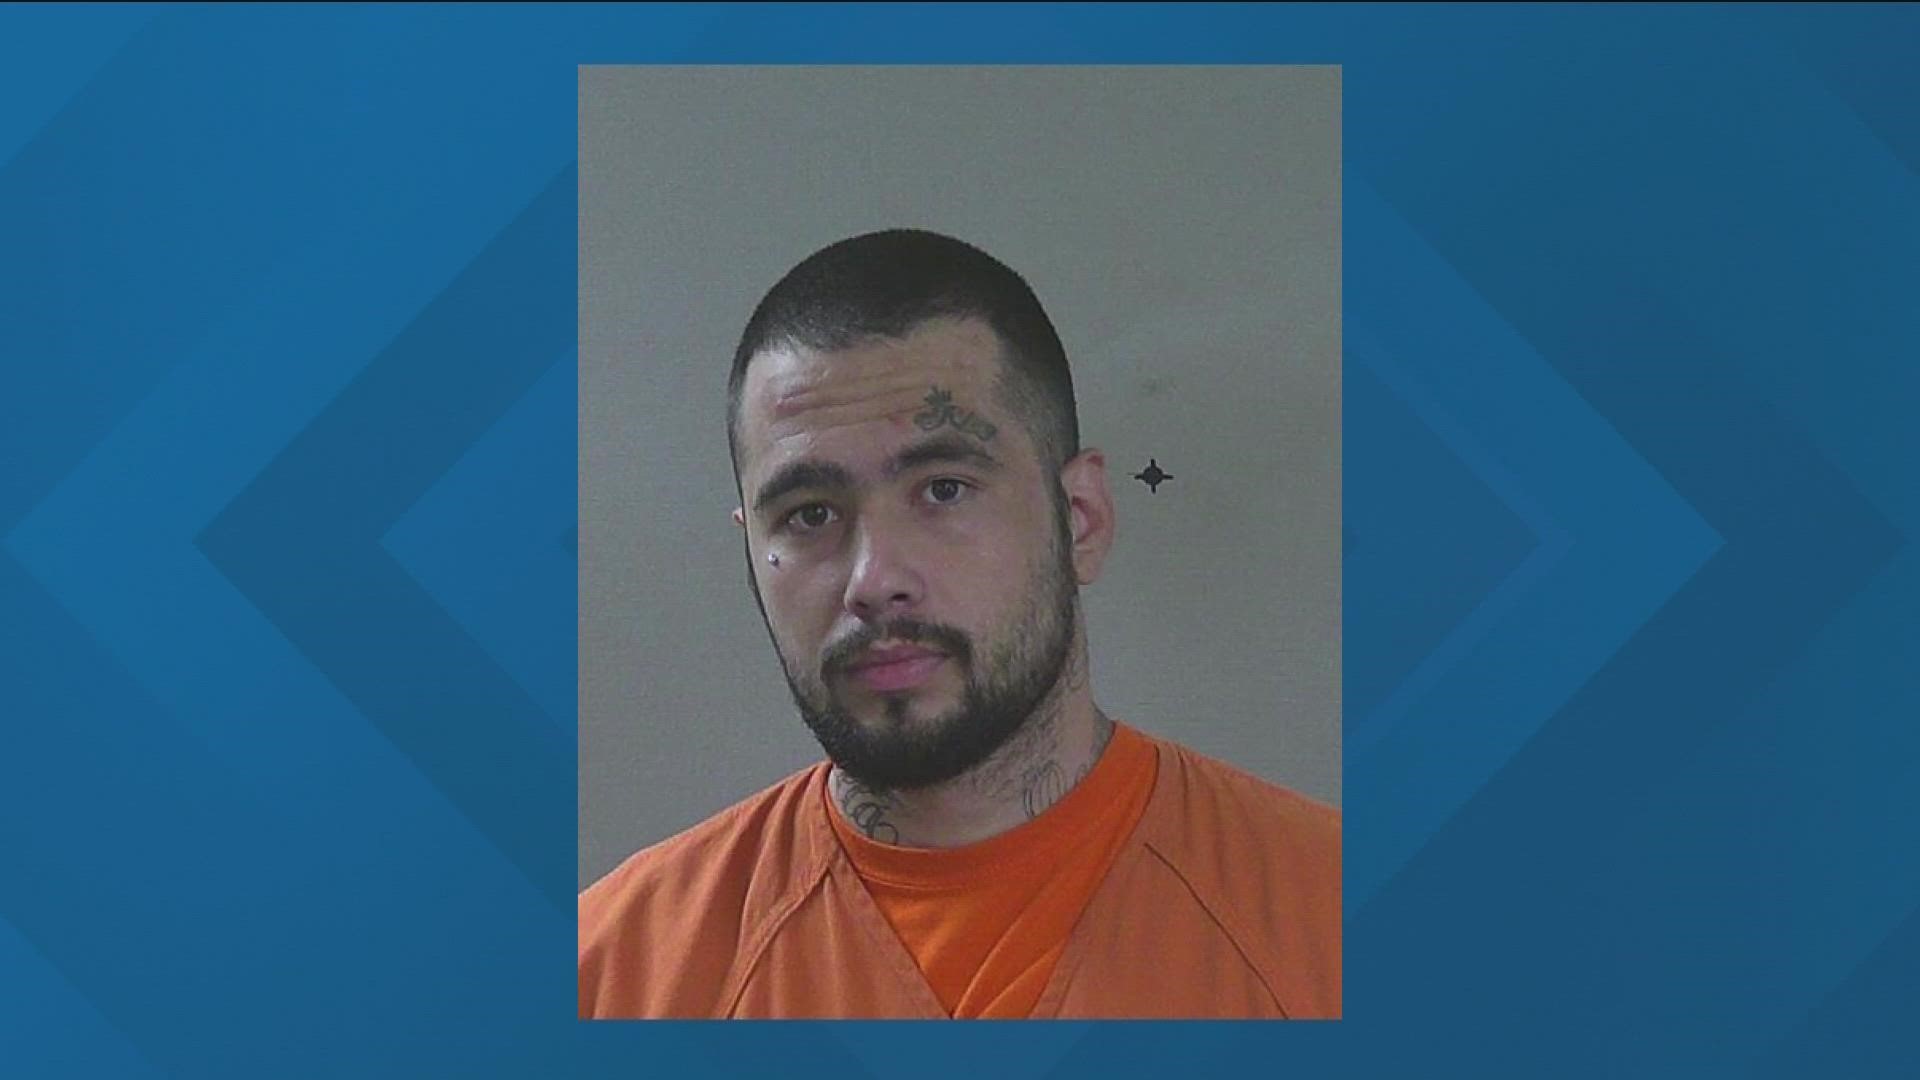 Sean Anthony Tambini was transported to Canyon County from Nevada, and the warrant was served Monday for the alleged kidnap and murder of a man in November 2021.